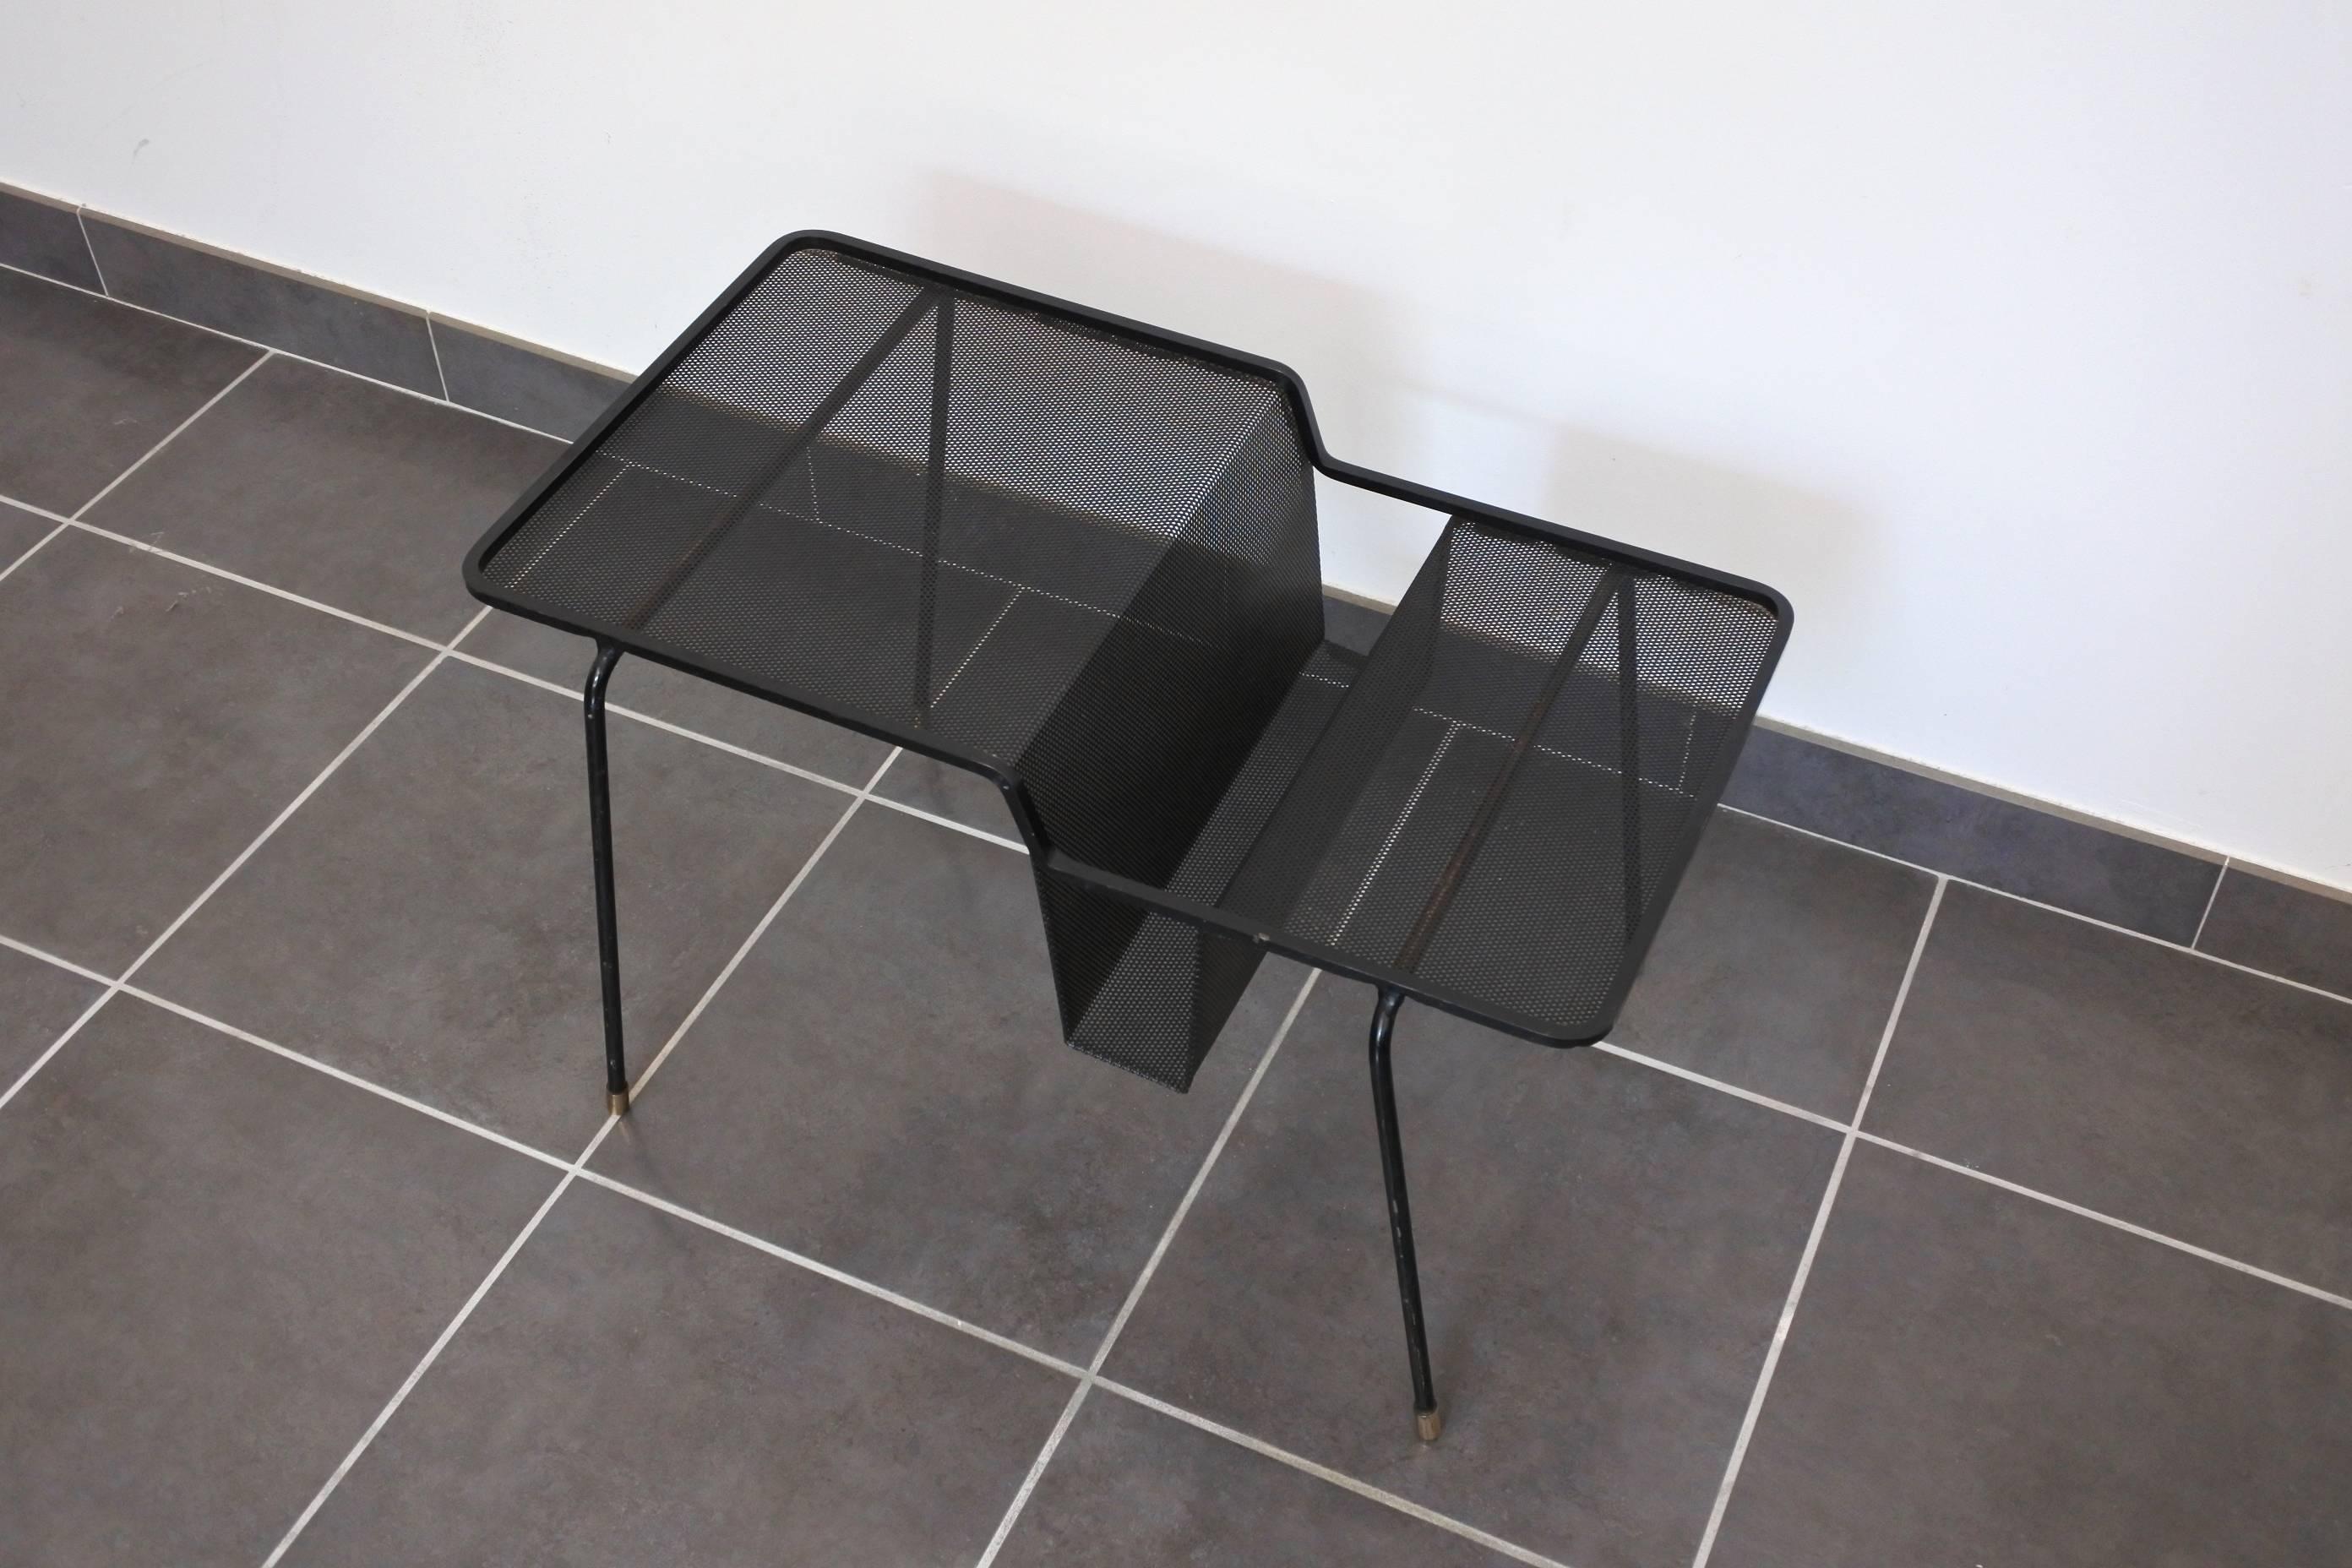 Mid-Century "Java" side table with a magazine holder by French designer Mathieu Mategot.
Black lacquered perforated and tubular metal, brass glides,
circa 1956.
Original lacquer.
The table is documented in the book "Mathieu